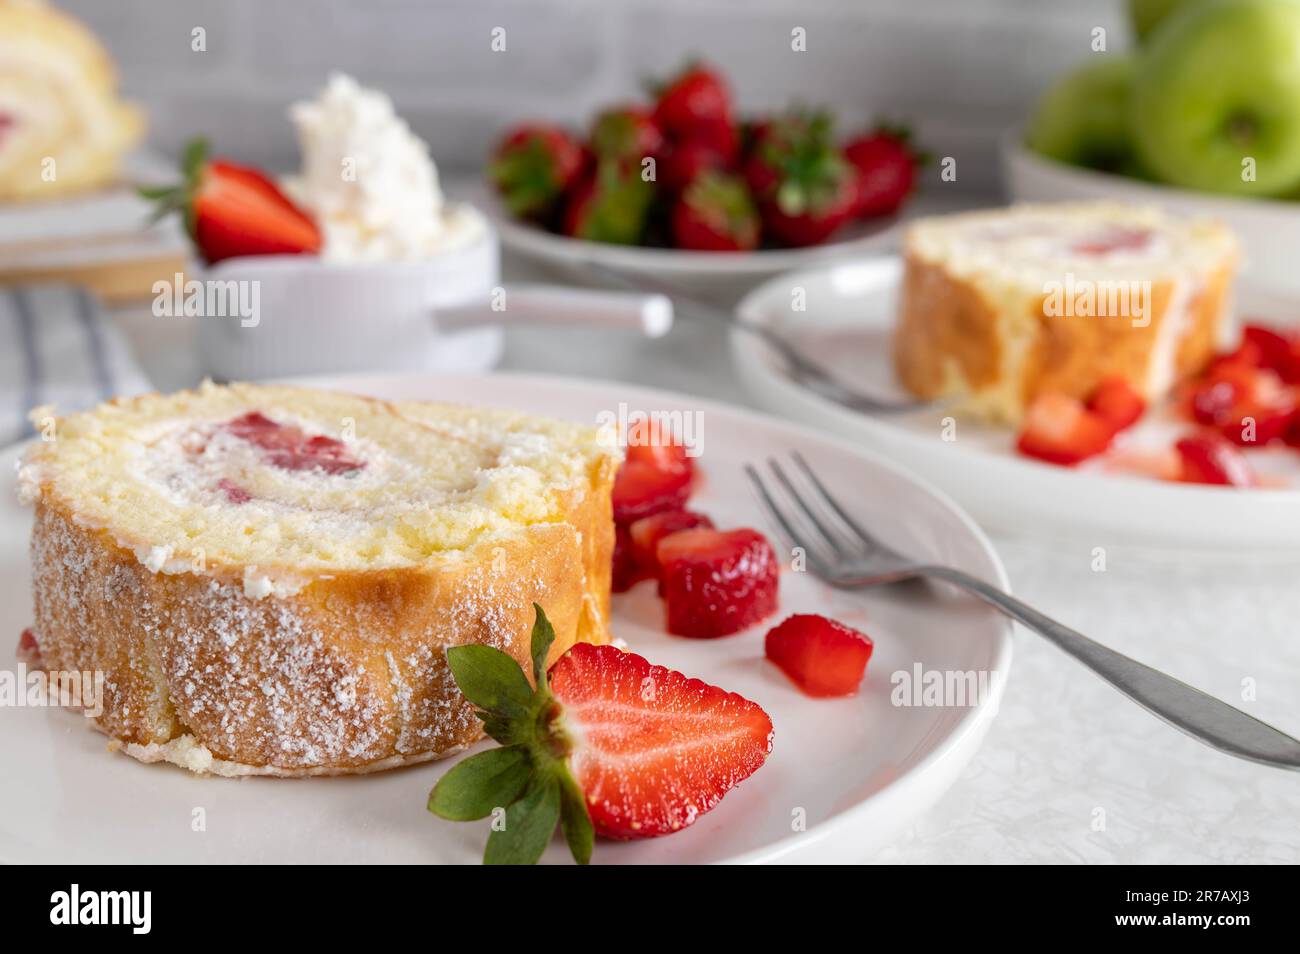 Slice of Swiss roll with strawberries and cream Stock Photo